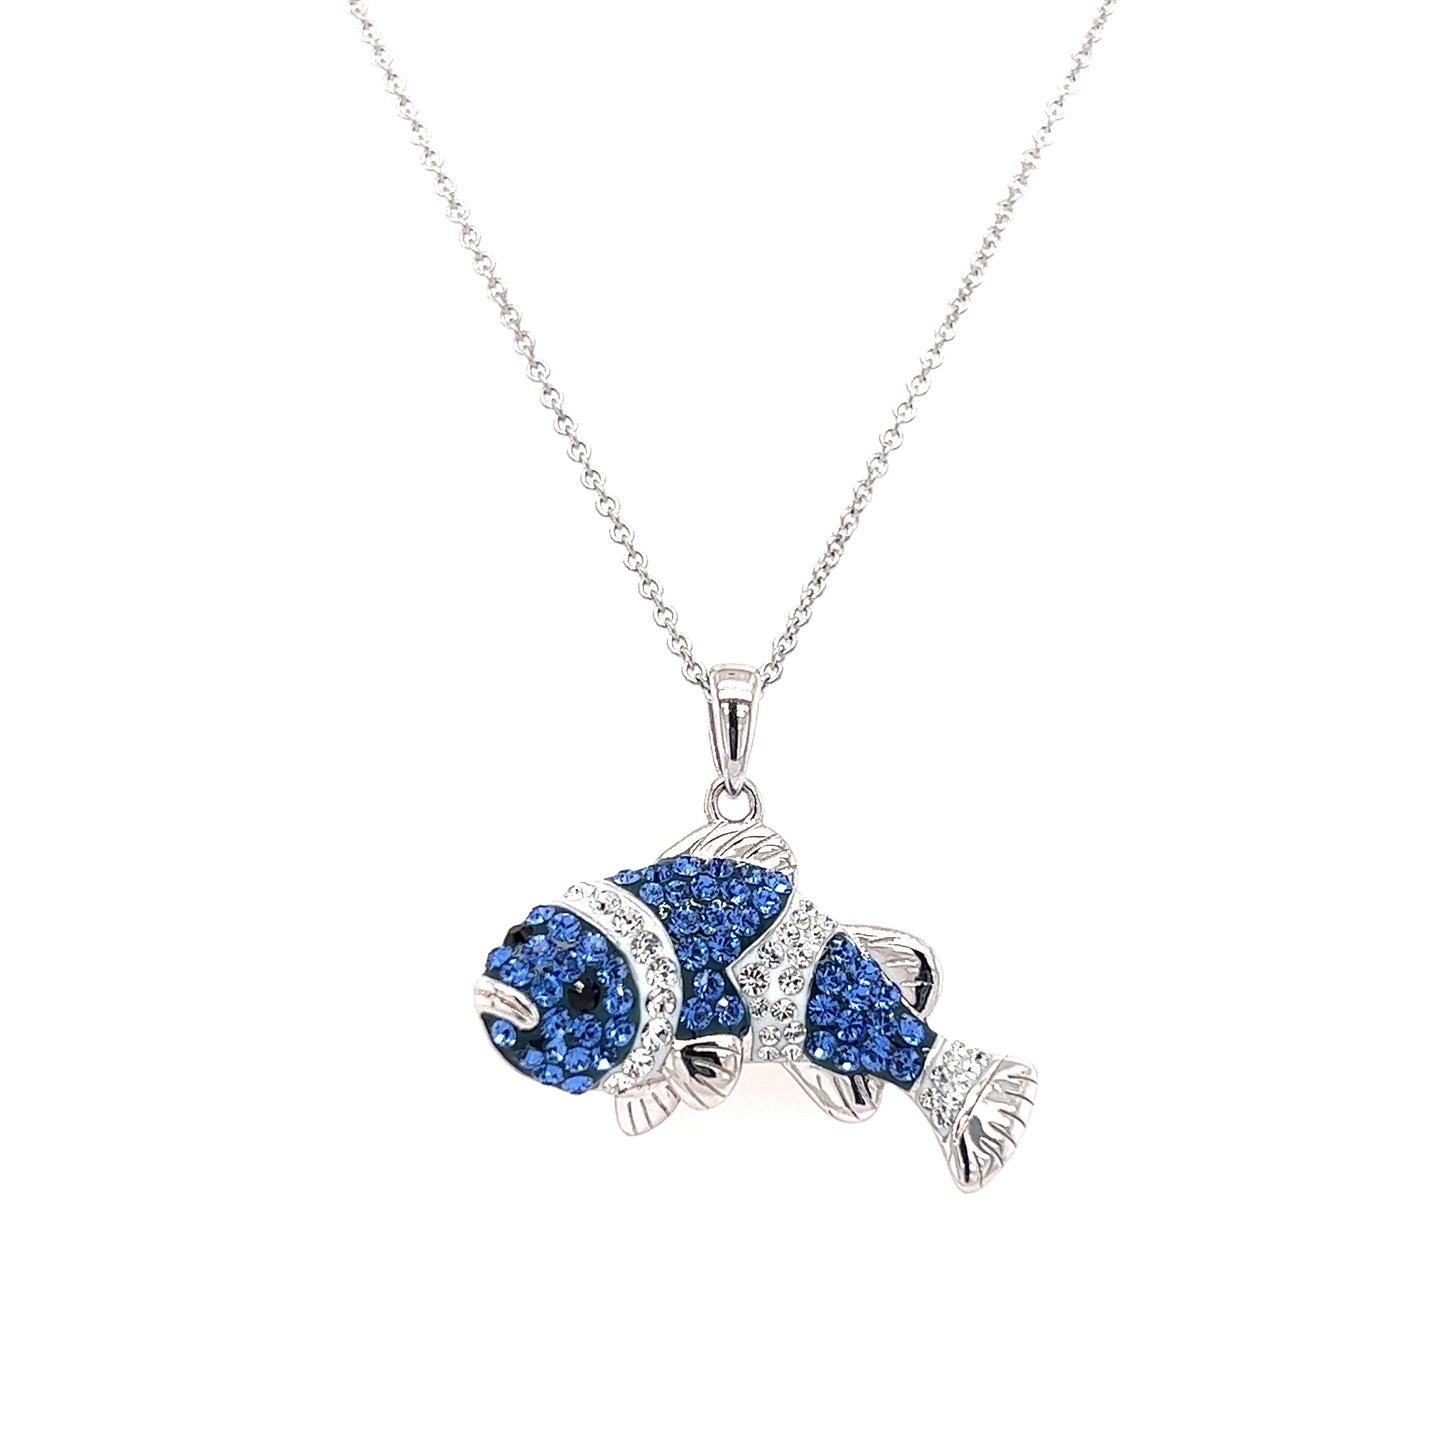 Clownfish Necklace with Blue and White Crystals in Sterling Silver Pendant and Chain Front View